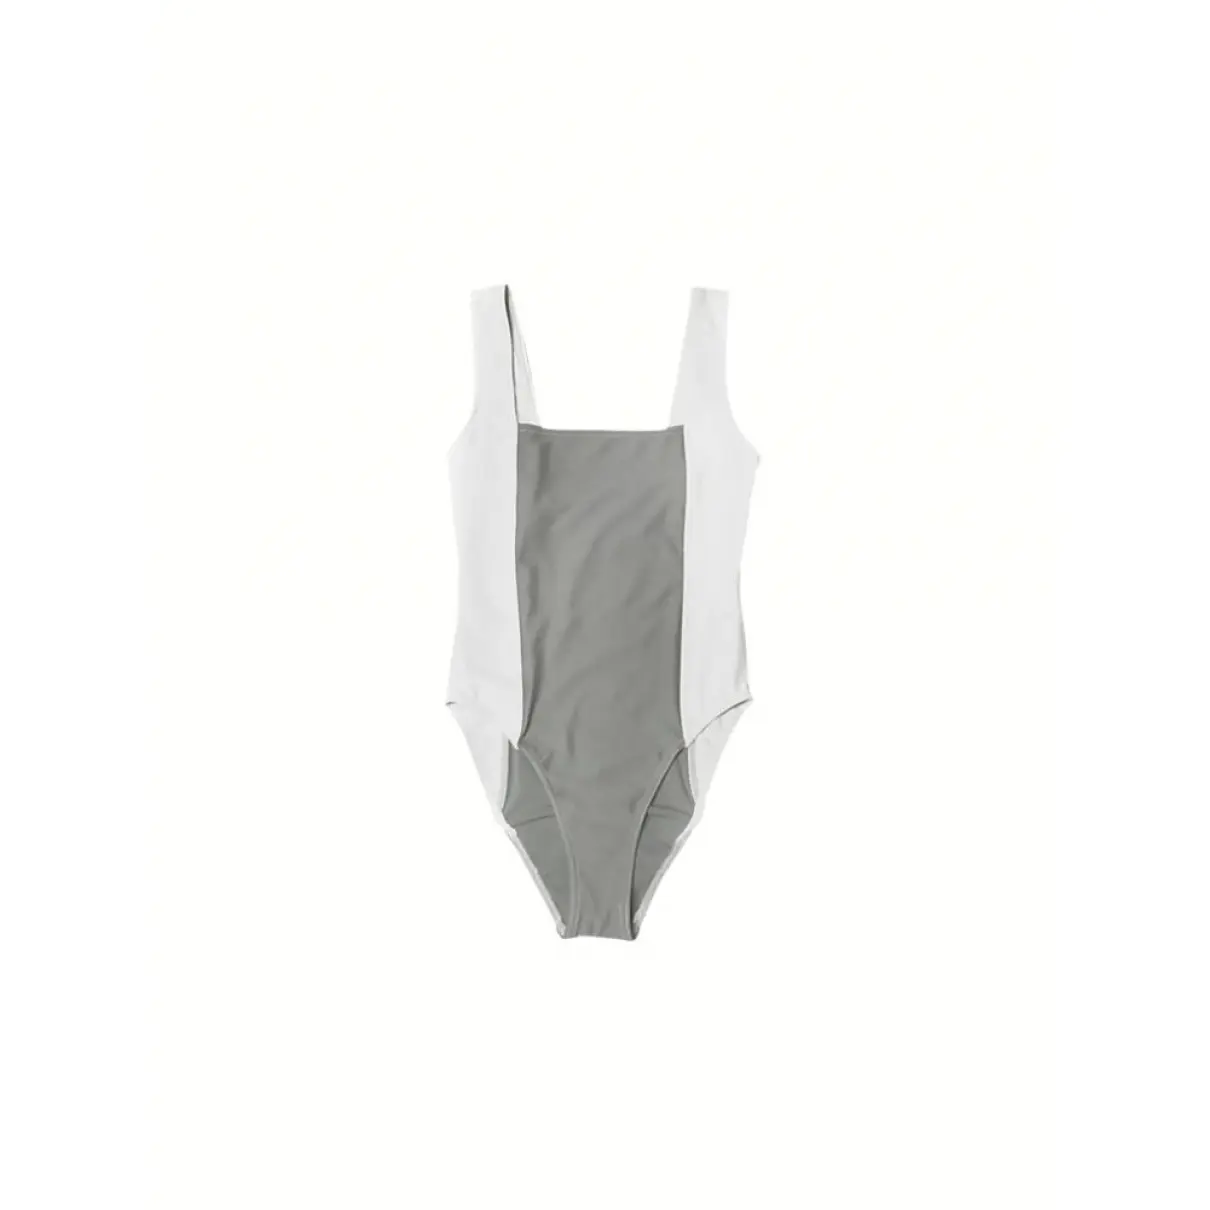 Buy Chanel One-piece swimsuit online